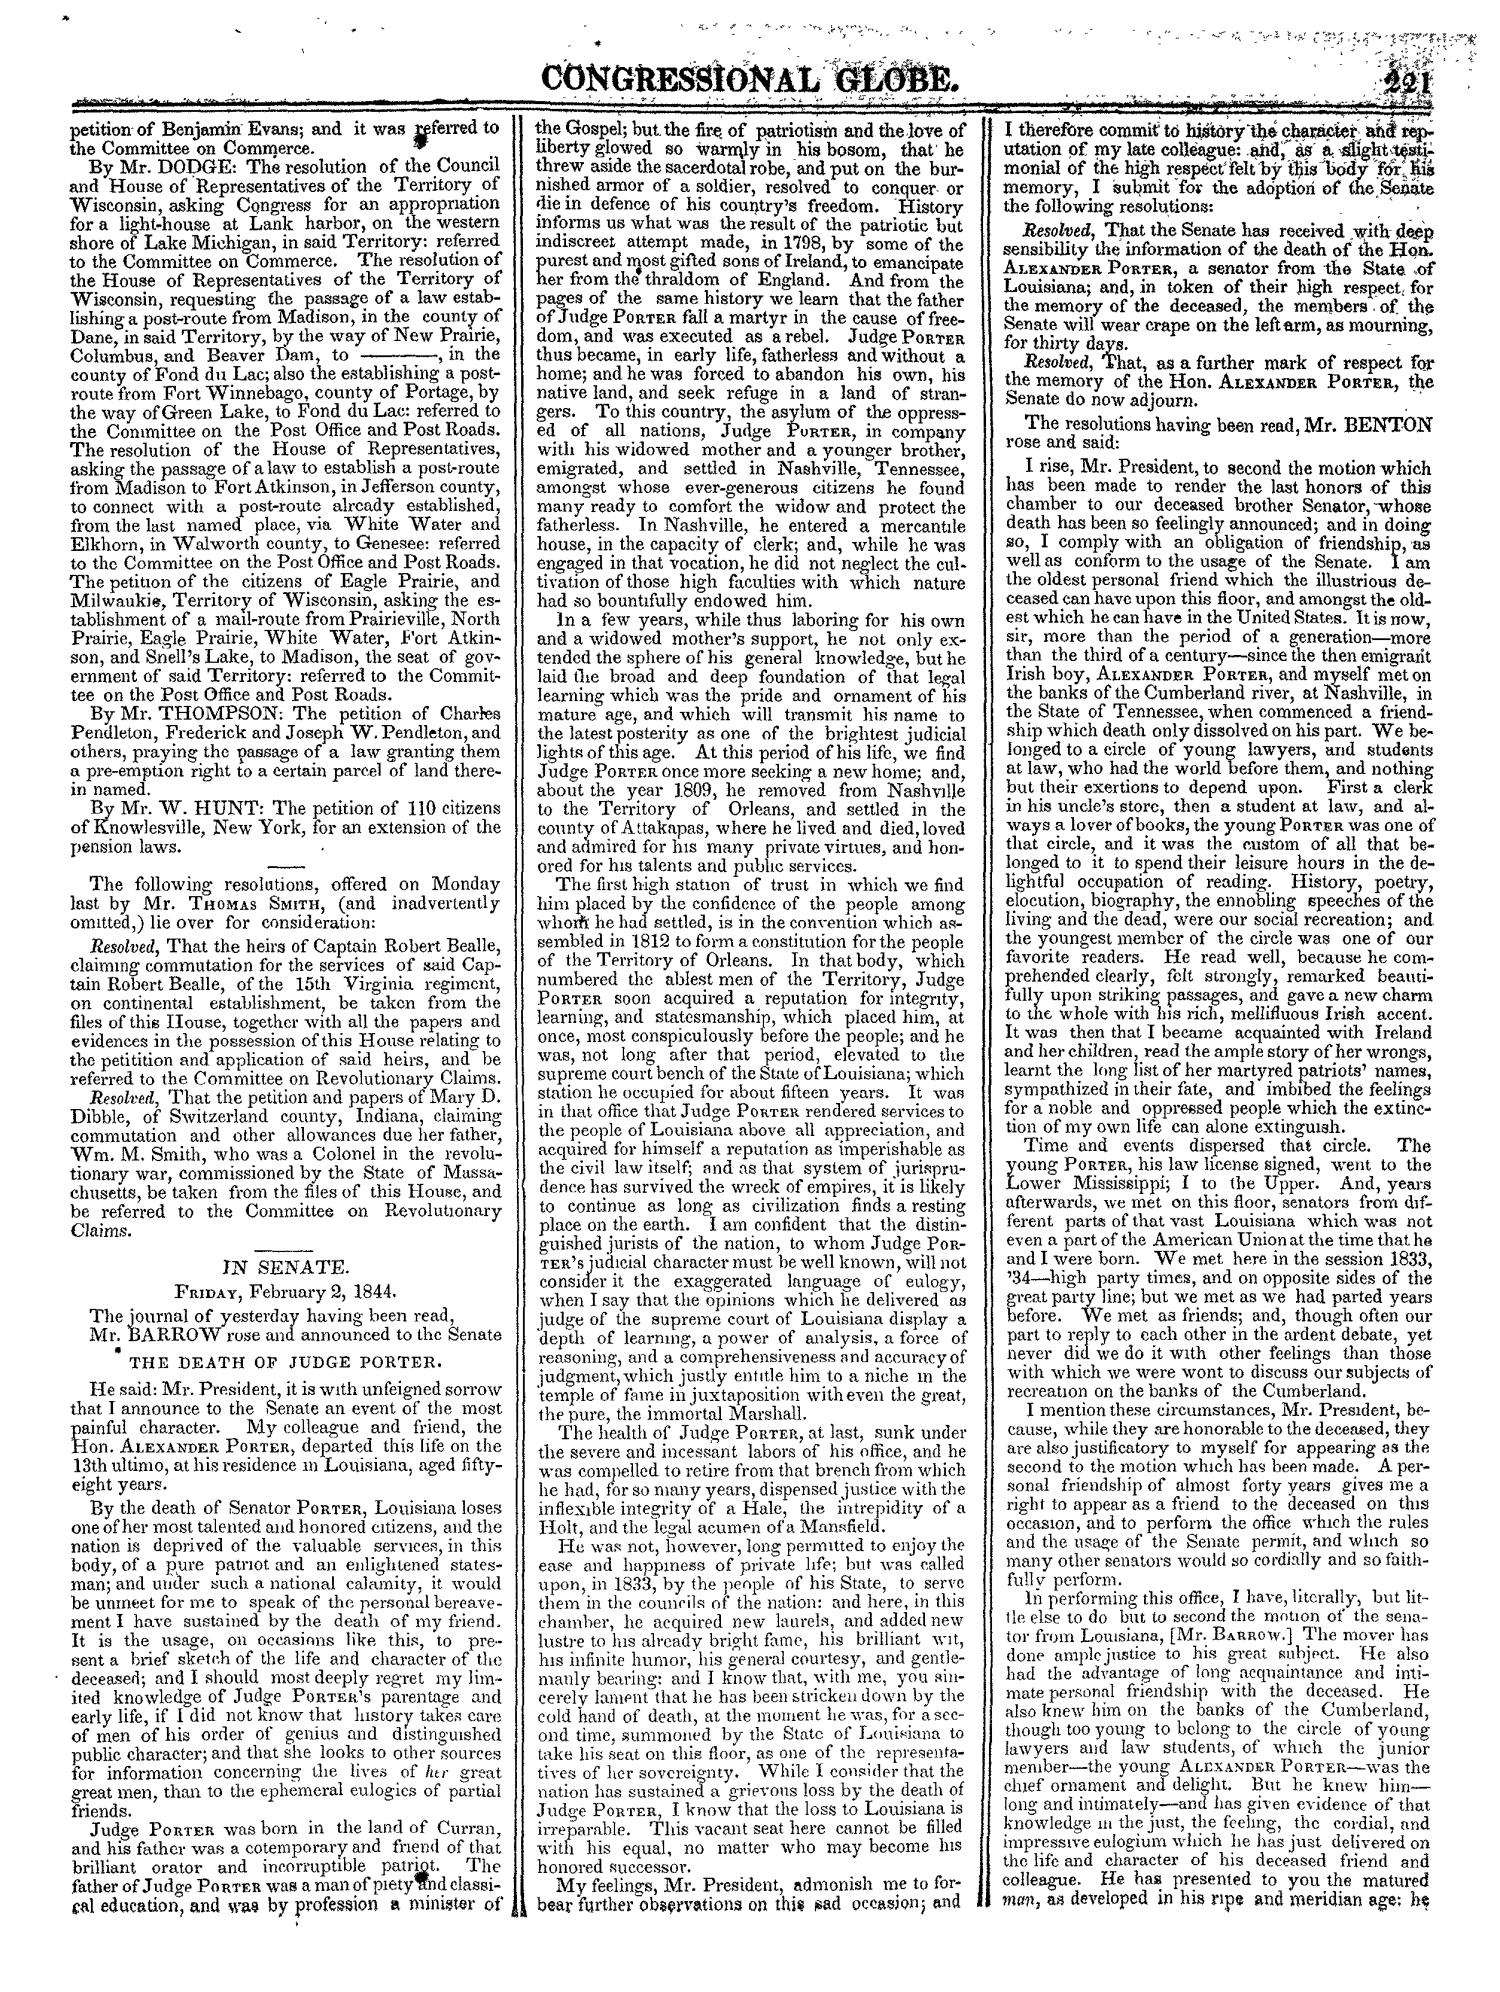 The Congressional Globe, Volume 13, Part 1: Twenty-Eighth Congress, First Session
                                                
                                                    221
                                                